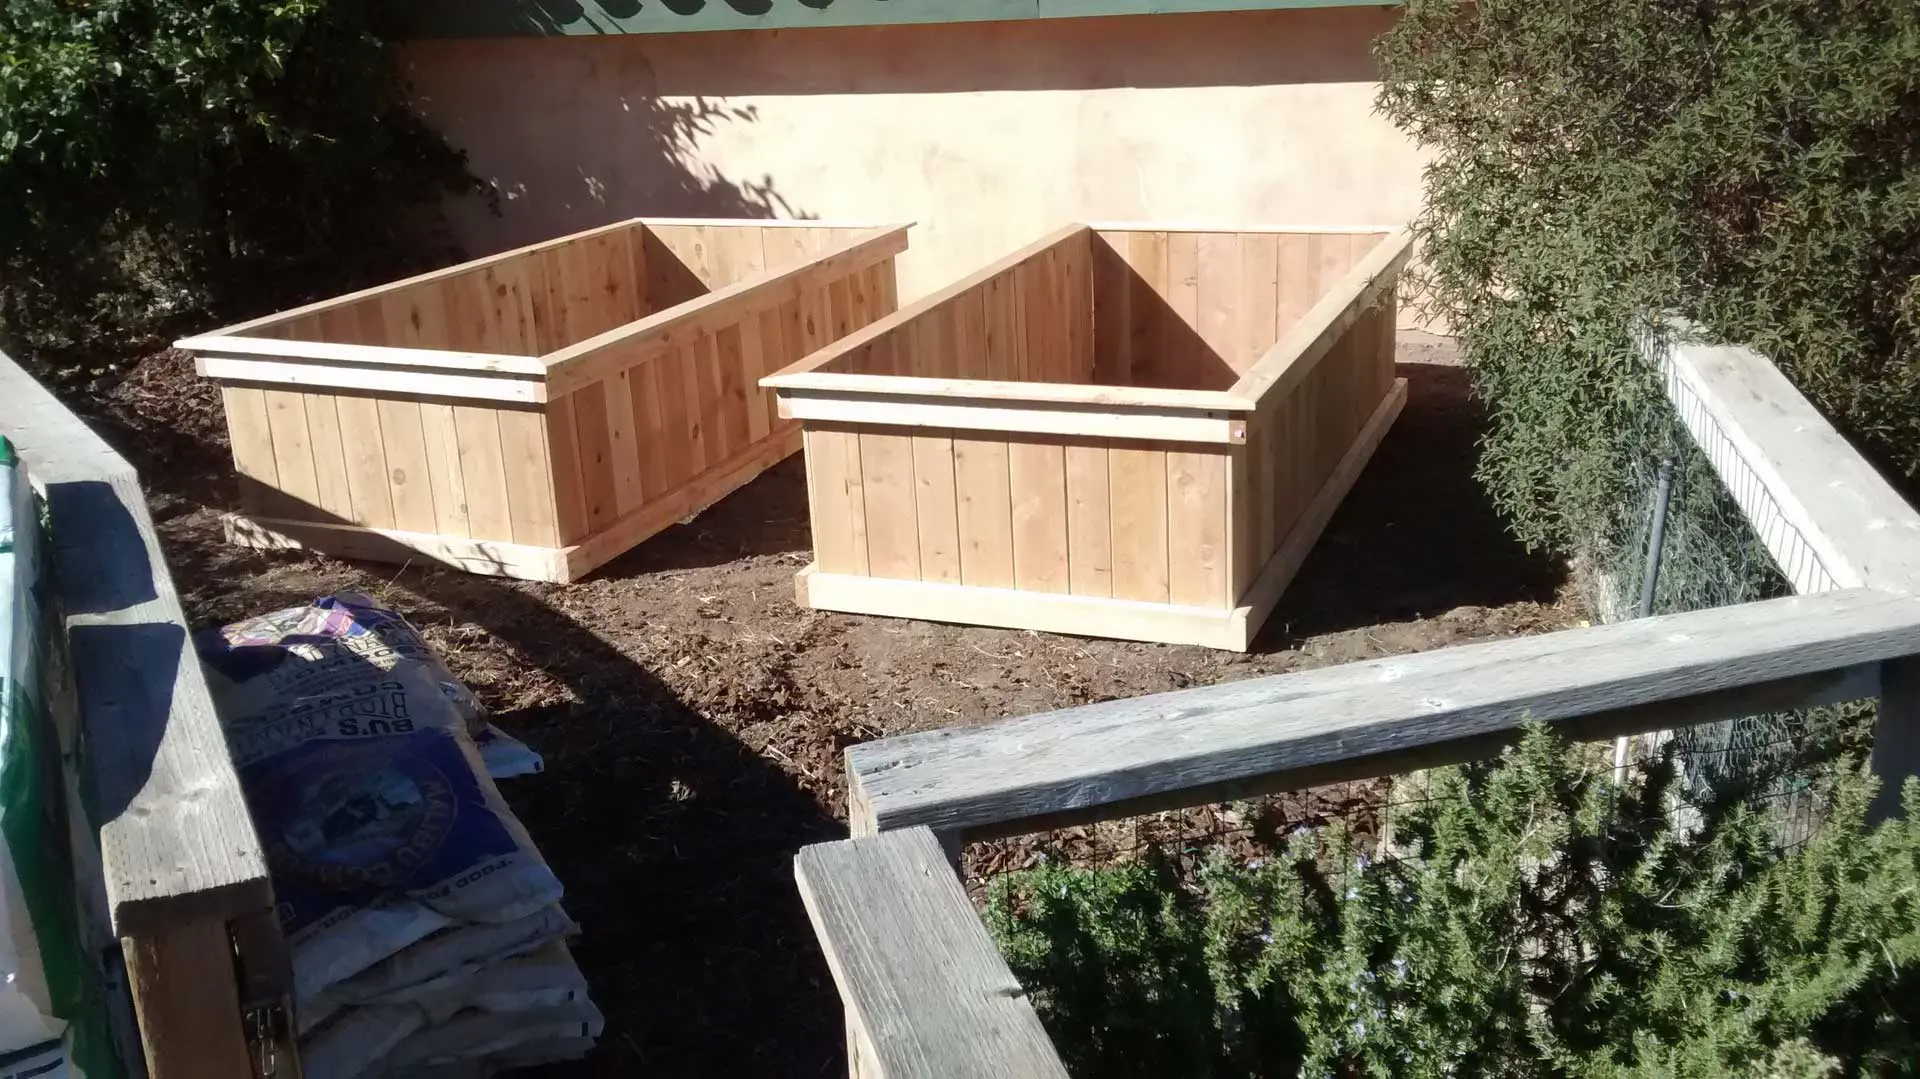 Two wooden planter boxes in a backyard.